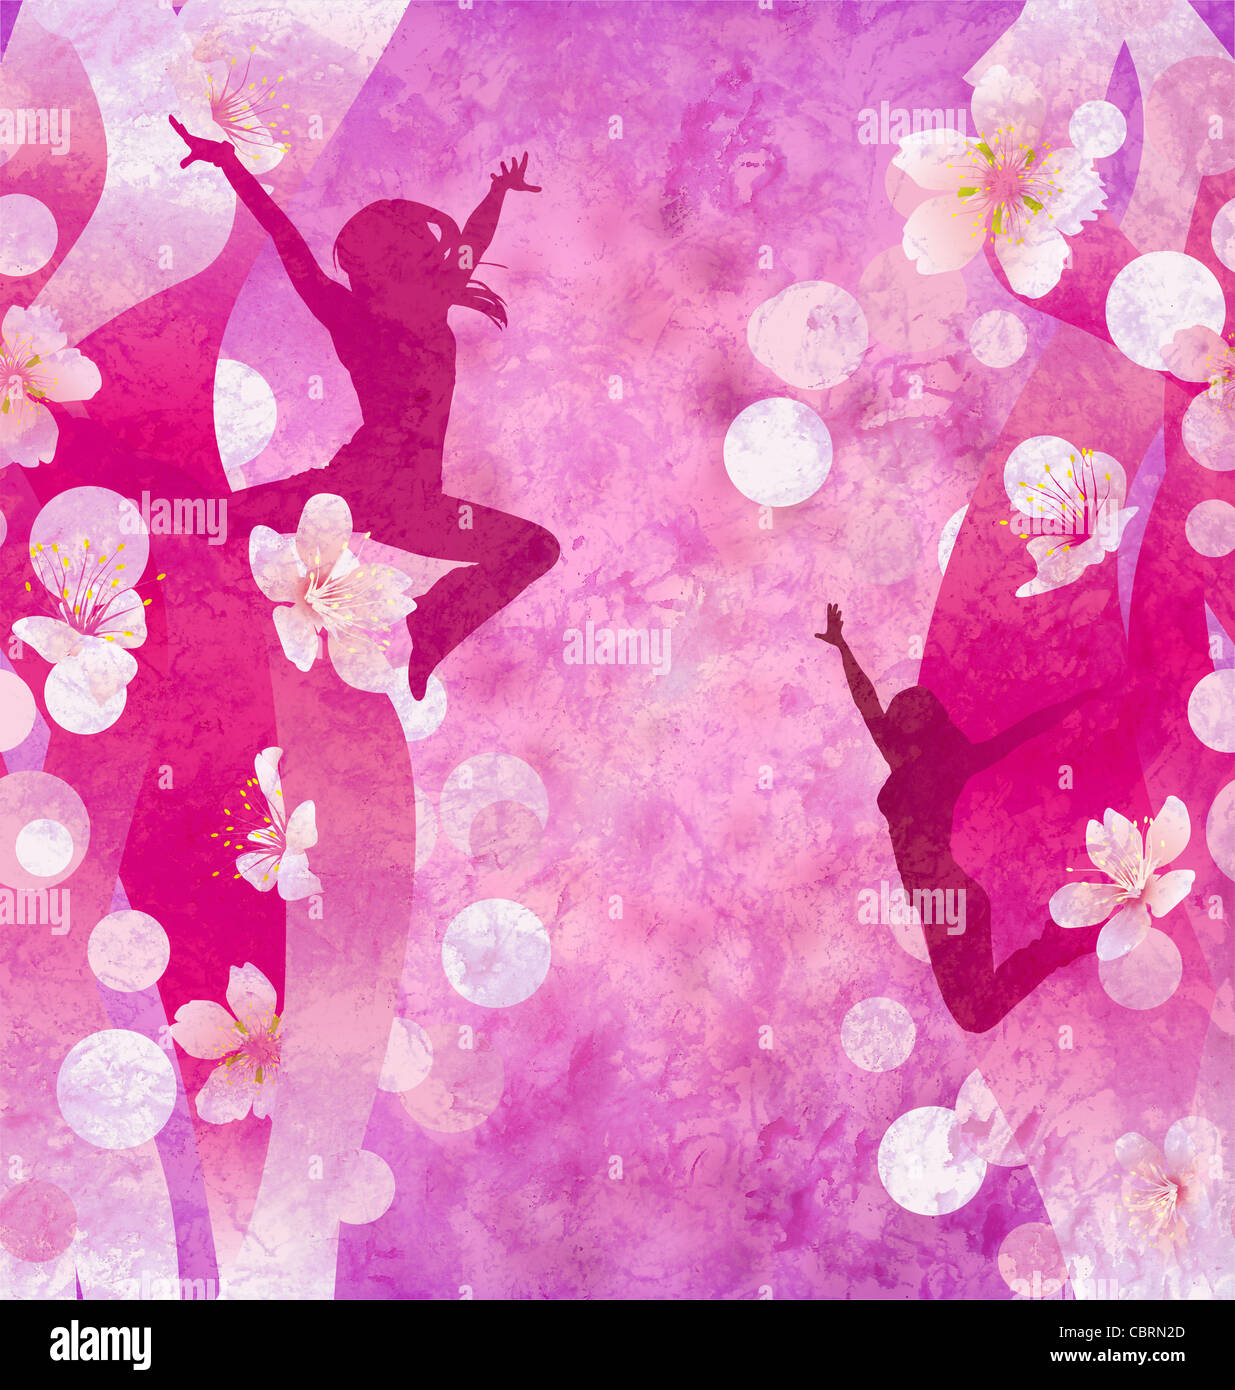 three urban modern dancing women silhuettes on the red or pink grunge background Stock Photo